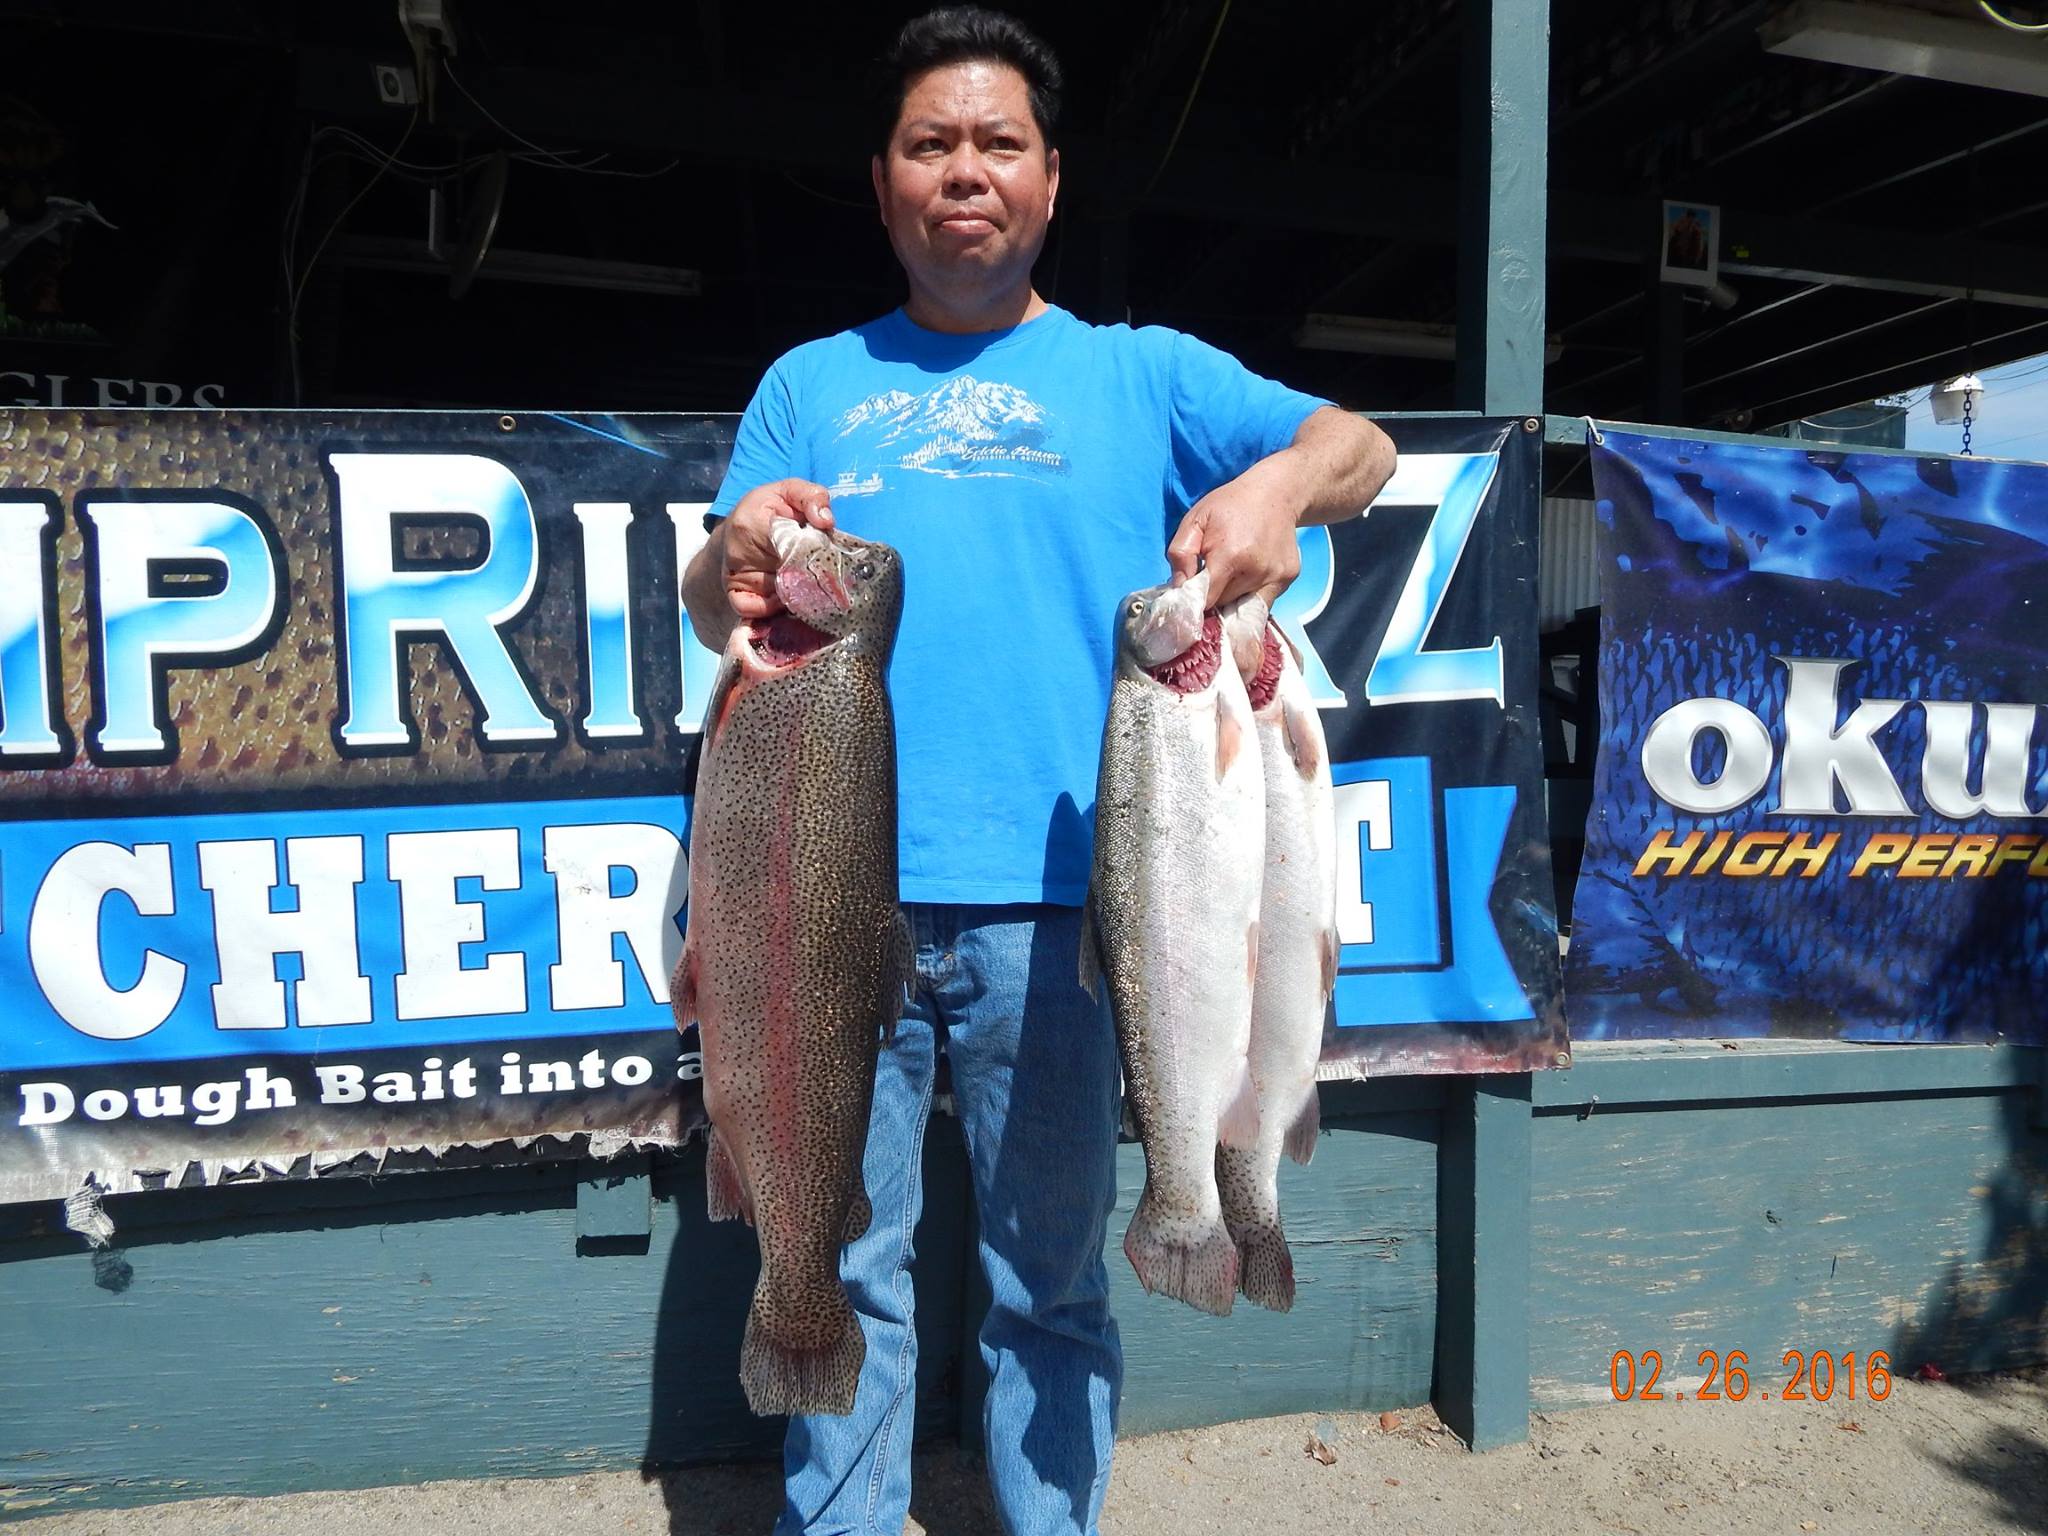 Steve Tran of Rolland Heights landed 3 trout totaling 22 pounds 12 ounces, his largest came in at 12 pounds